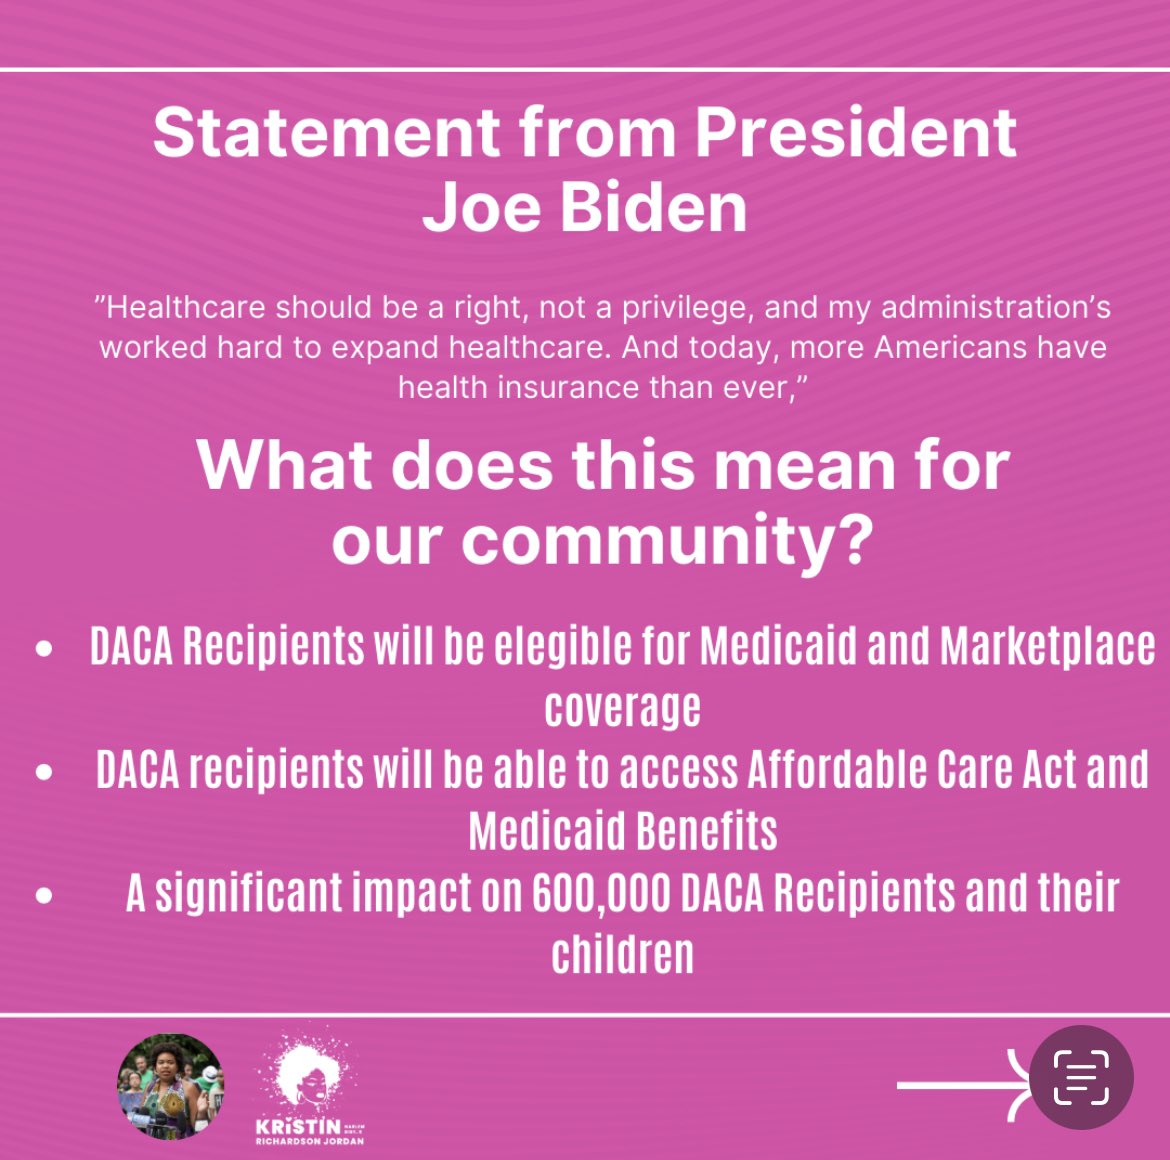 Last week our director of communications represented our office at the “Coverage for All” rally! This week Joe Biden expressed that all DACA recipients will be able to have access to Medicaid benefits and the AFFORDBALE Care Act! This is a step in our fight for healthcare for…